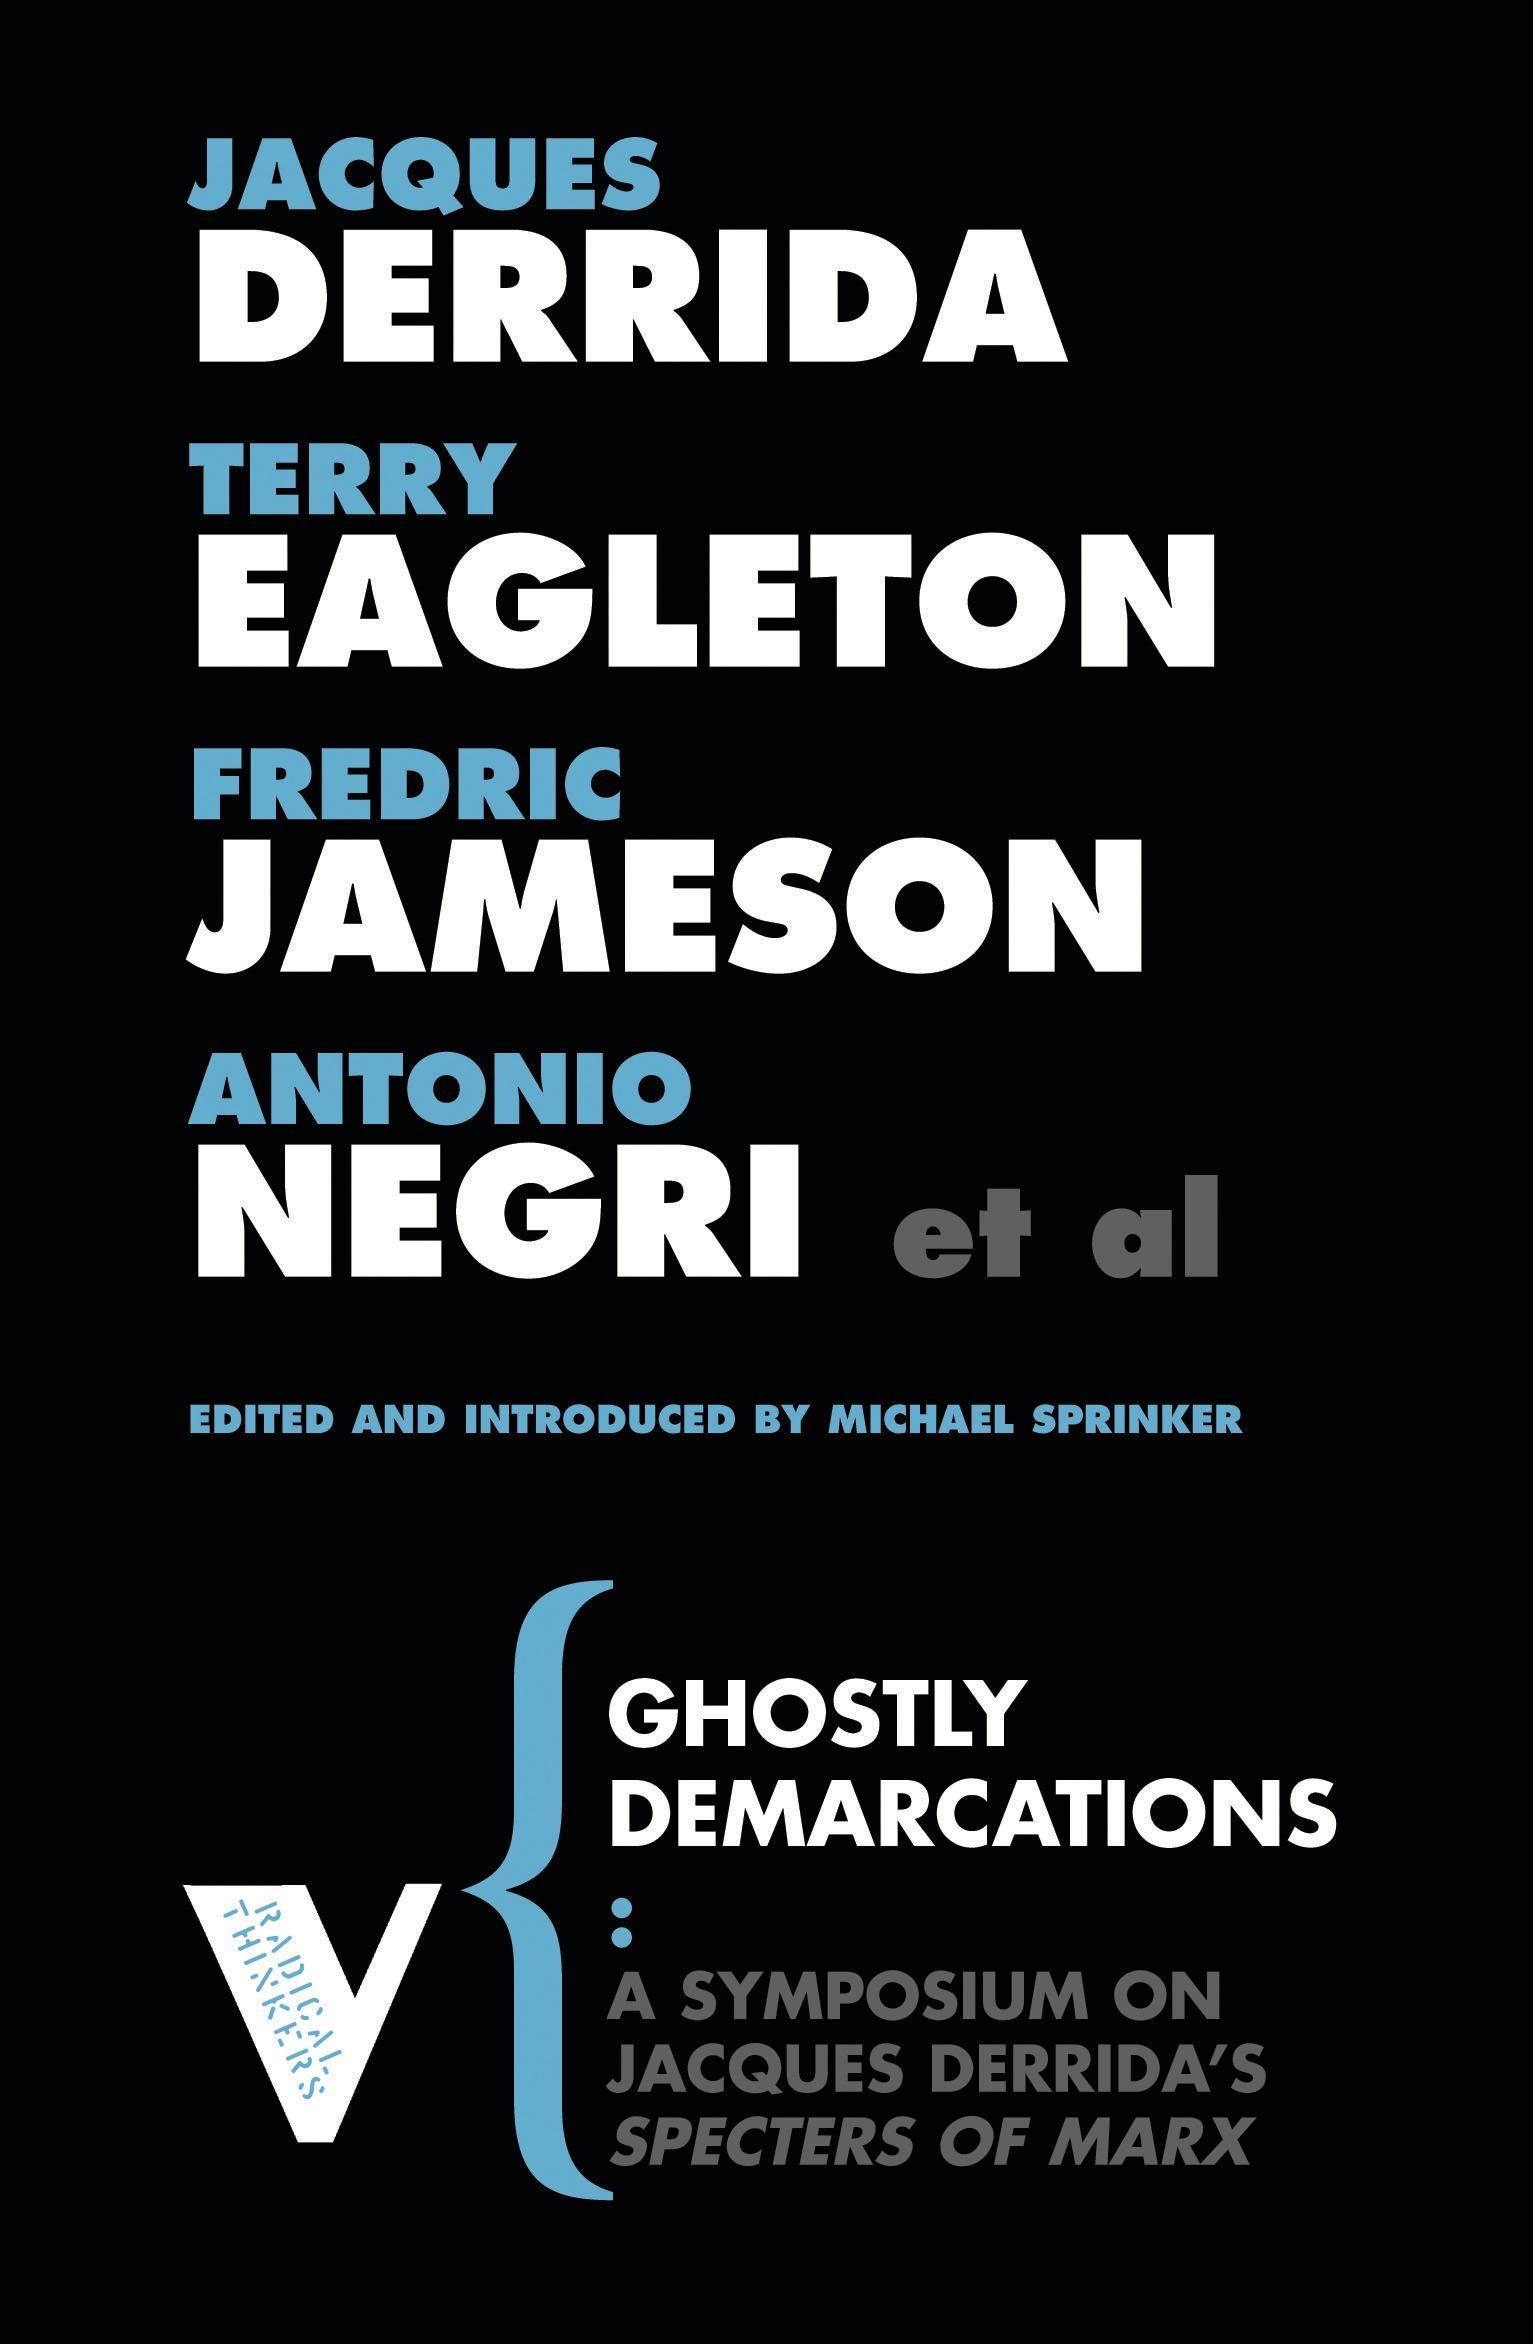 Ghostly Demarcations: A Symposium on Jacques Deridda s Specters of Marx - Derrida, Eagleton Jameson, Negri